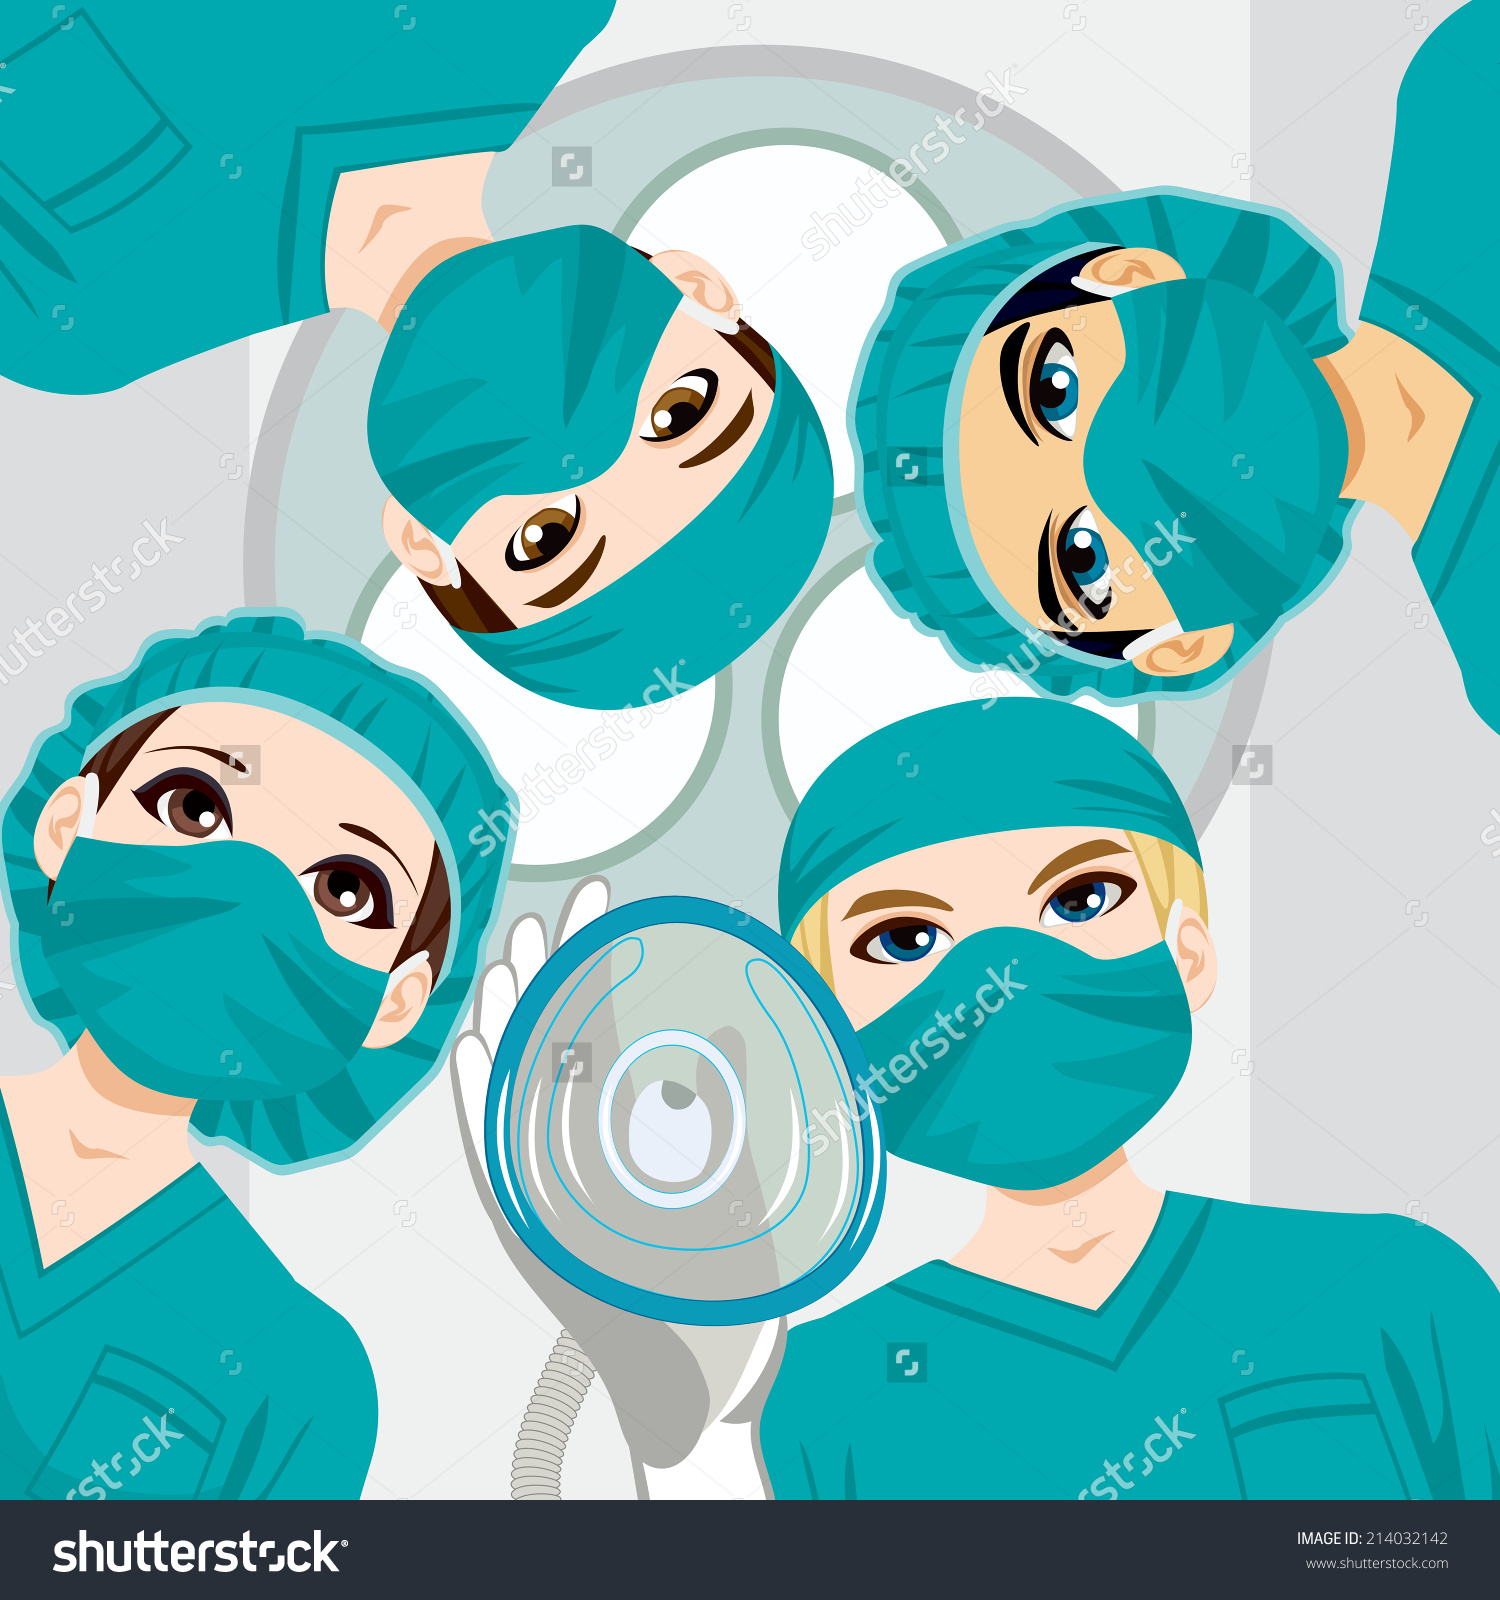 Surgical team clipart - Clipground